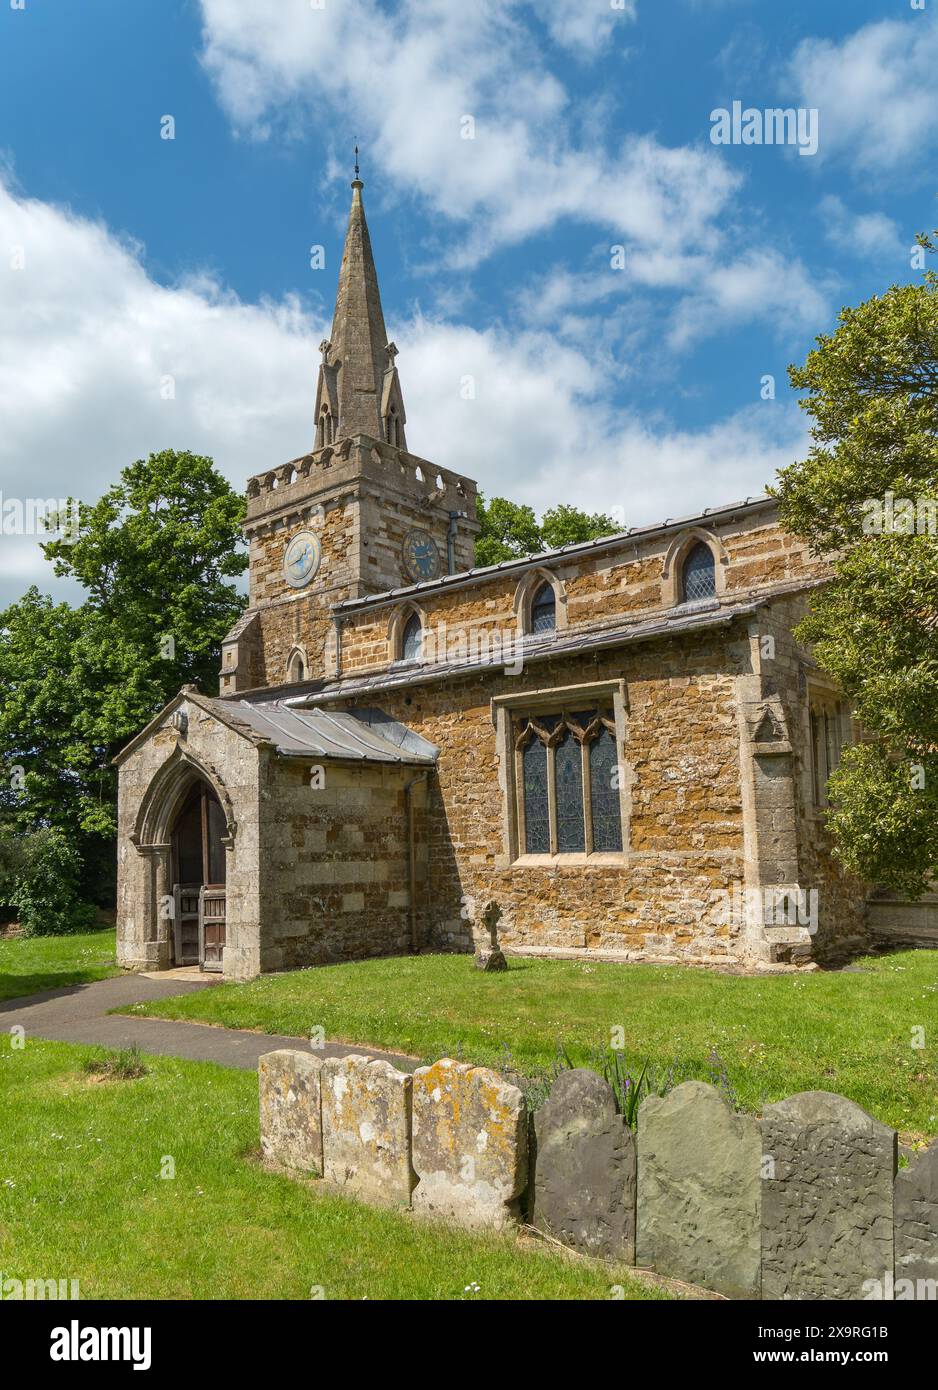 Exterior of the small English parish Church of St Mary the Virgin, Burrough on the Hill, Leicestershire, England, UK Stock Photo